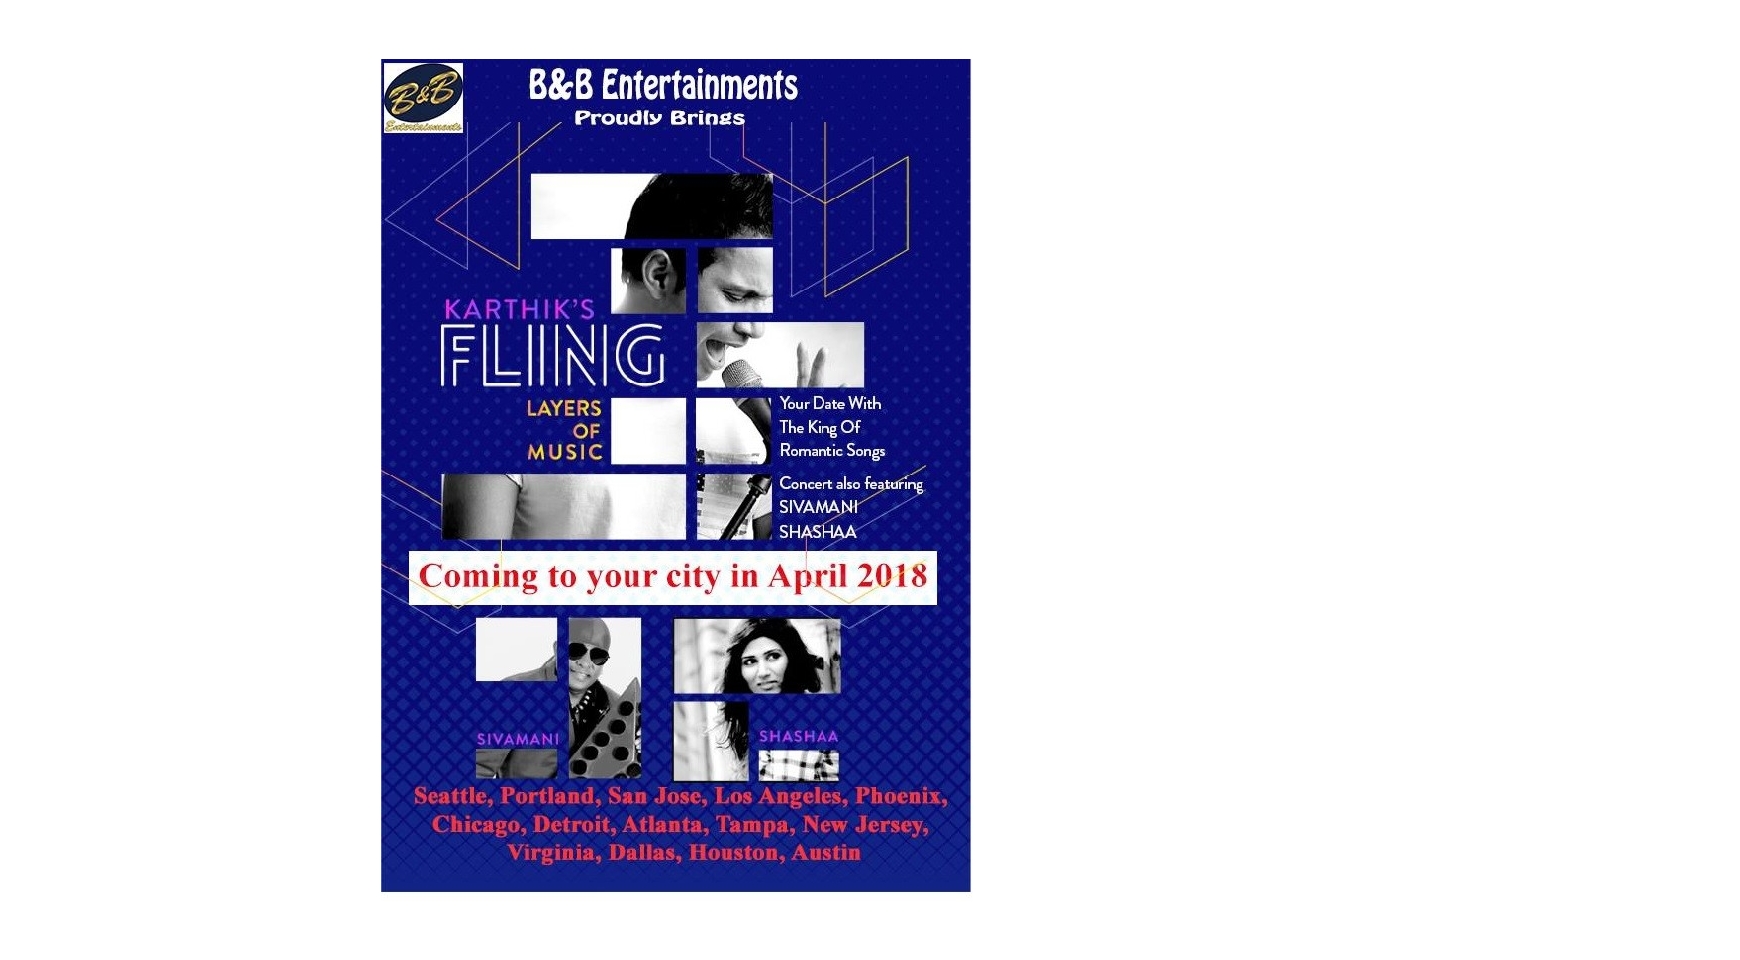 Fling - 'Layers of Music' Multilingual Live in concert  Buy Tickets Online | San Jose , Sat , 2018-04-21 | ThisisShow